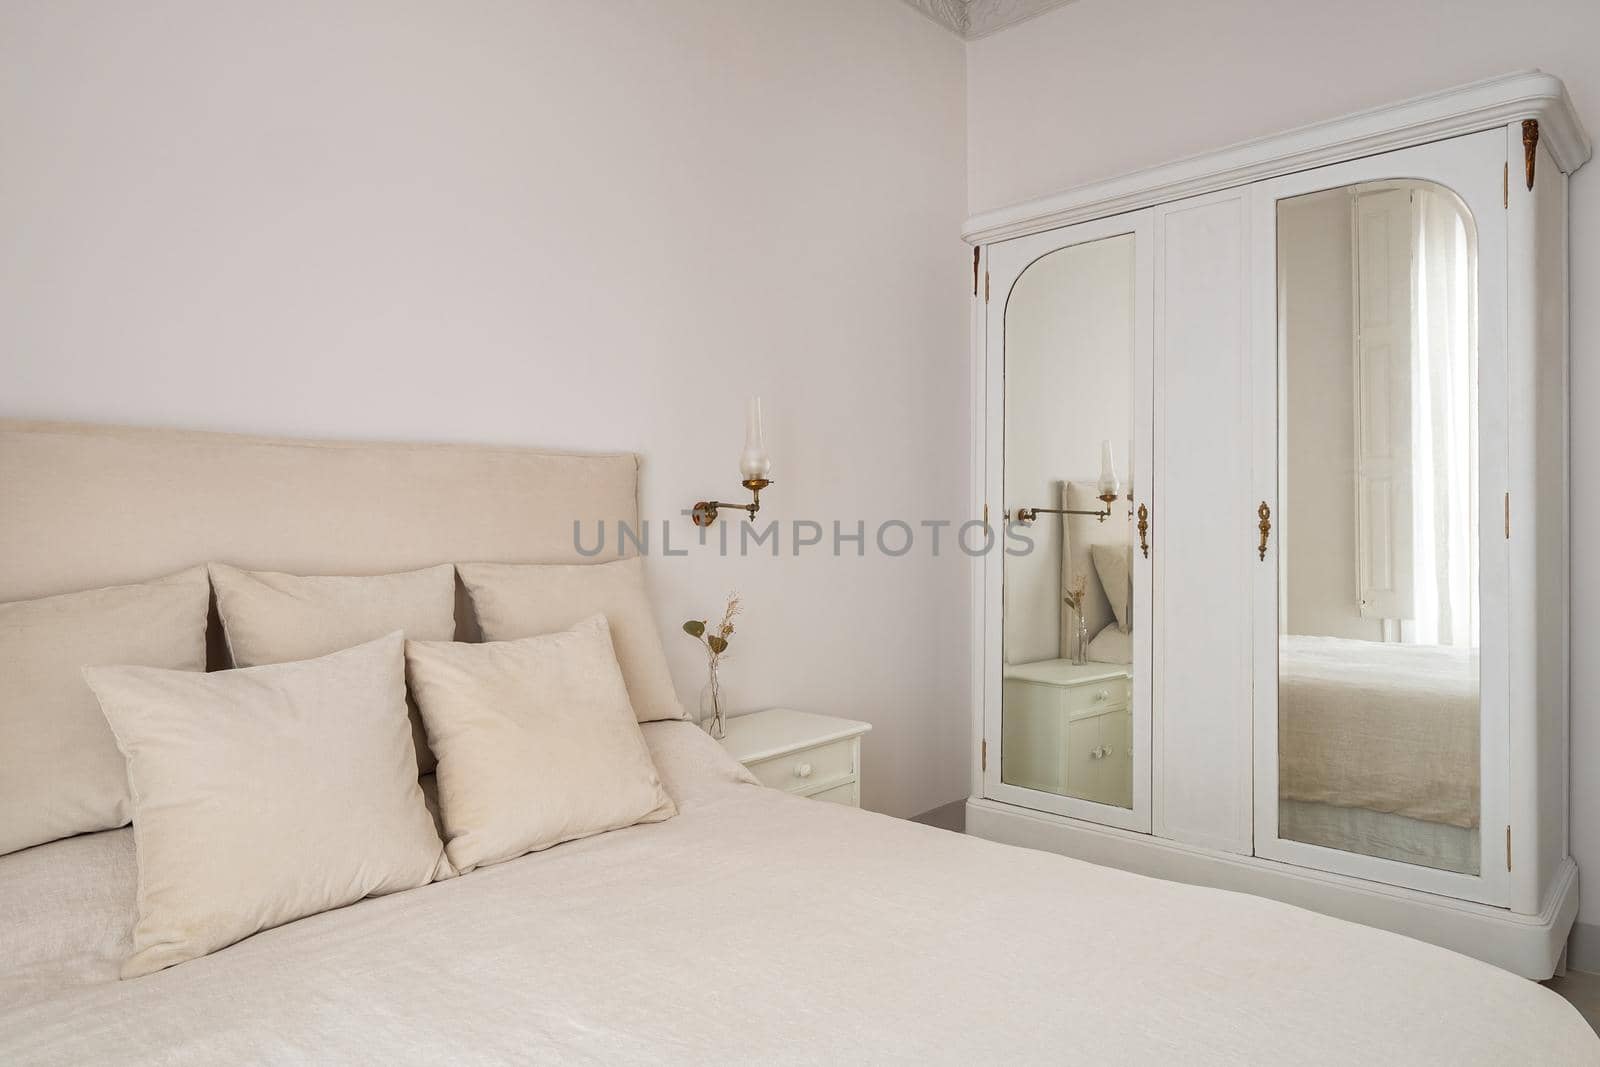 Bedroom interior with big cozy bed and vintage wardrobe with mirrors. Retro and classic style